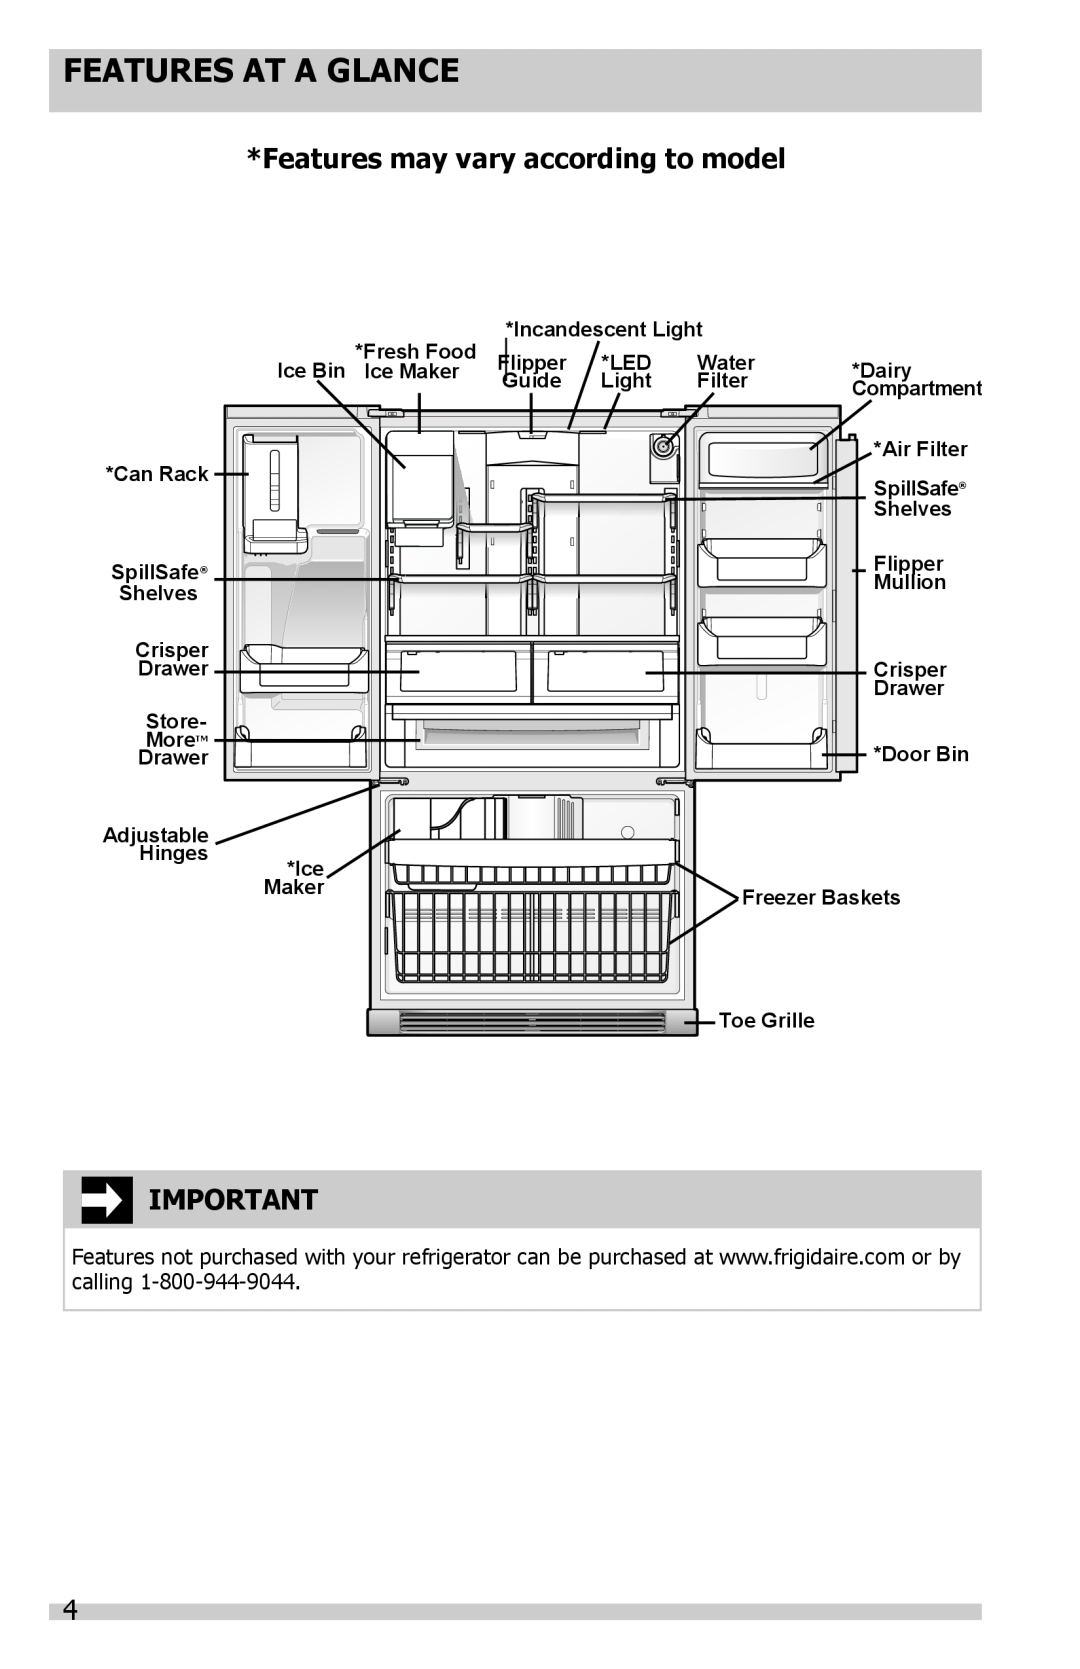 Frigidaire FGHB2844LF, FGHB2844LP, FGHB2869LF, FGHF2344MF Features At A Glance, Features may vary according to model 